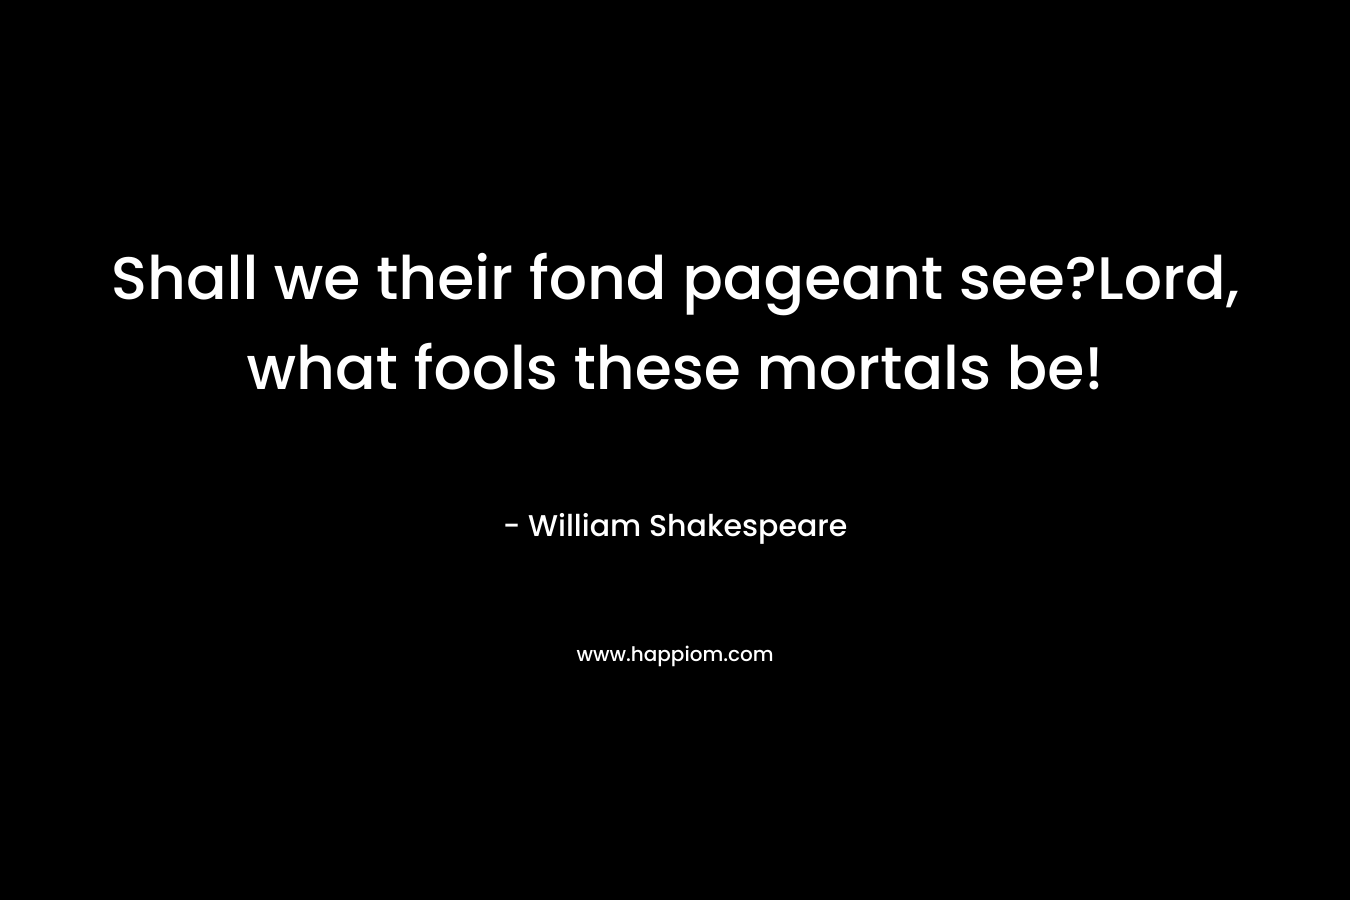 Shall we their fond pageant see?Lord, what fools these mortals be! – William Shakespeare